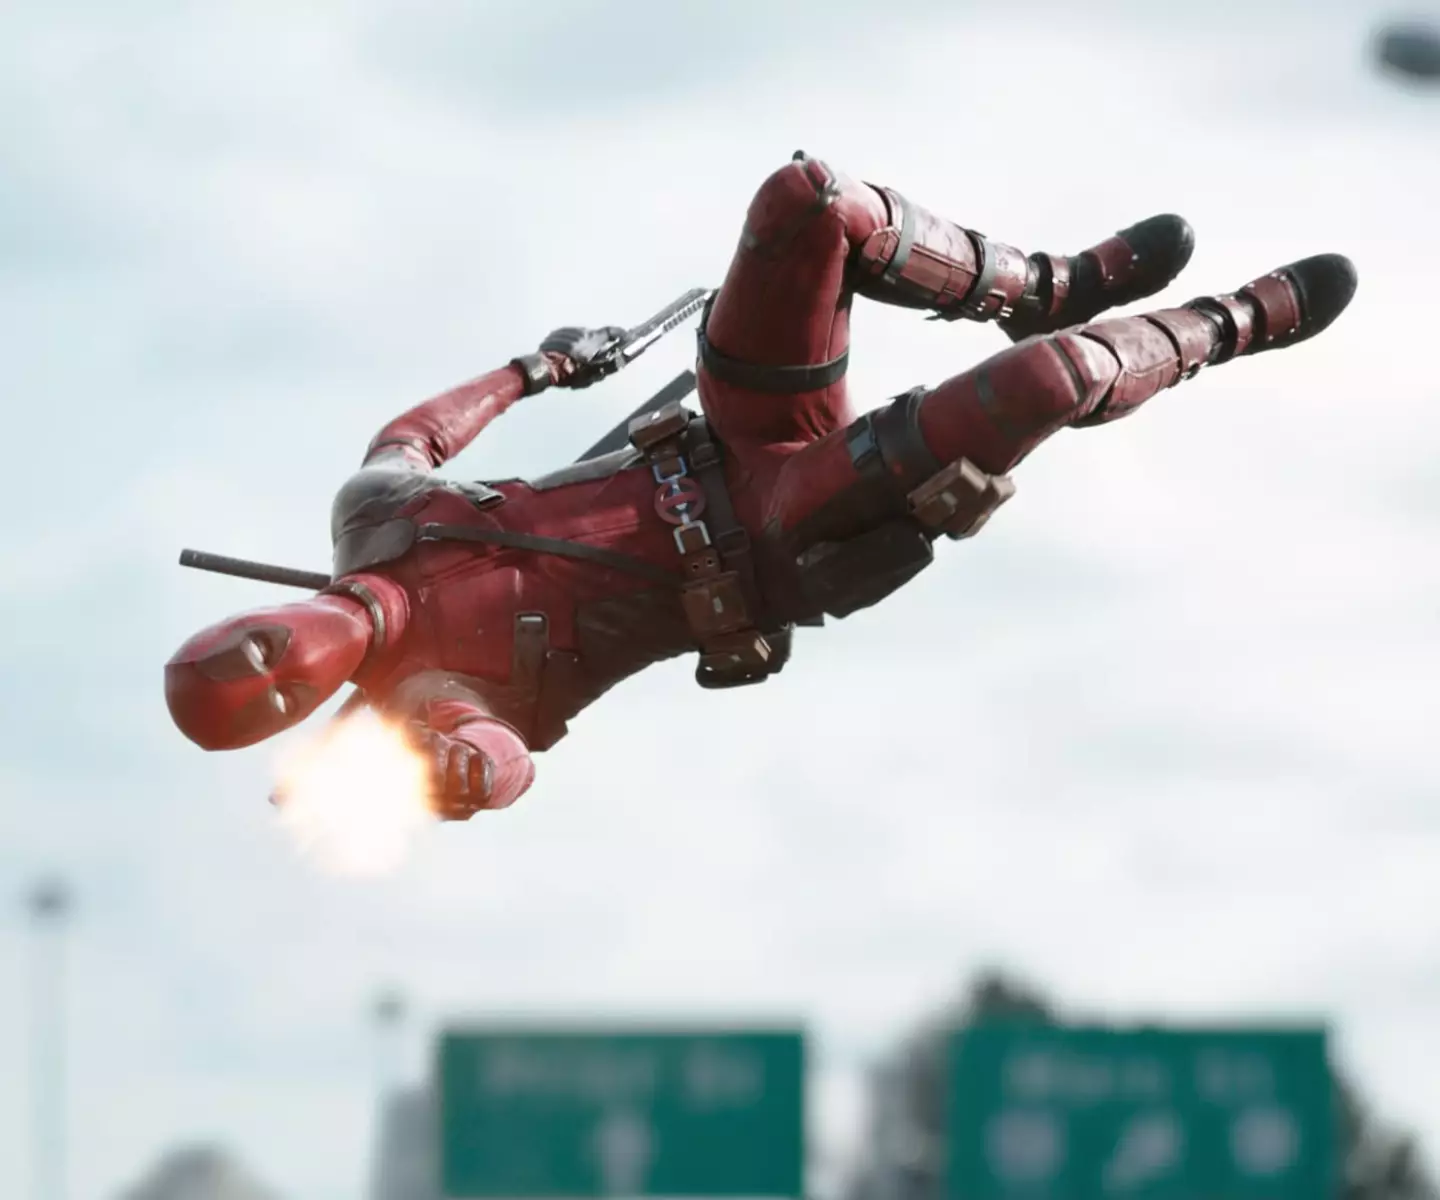 Deadpool, flying through the air like a graceful swan, to land in cinemas early.